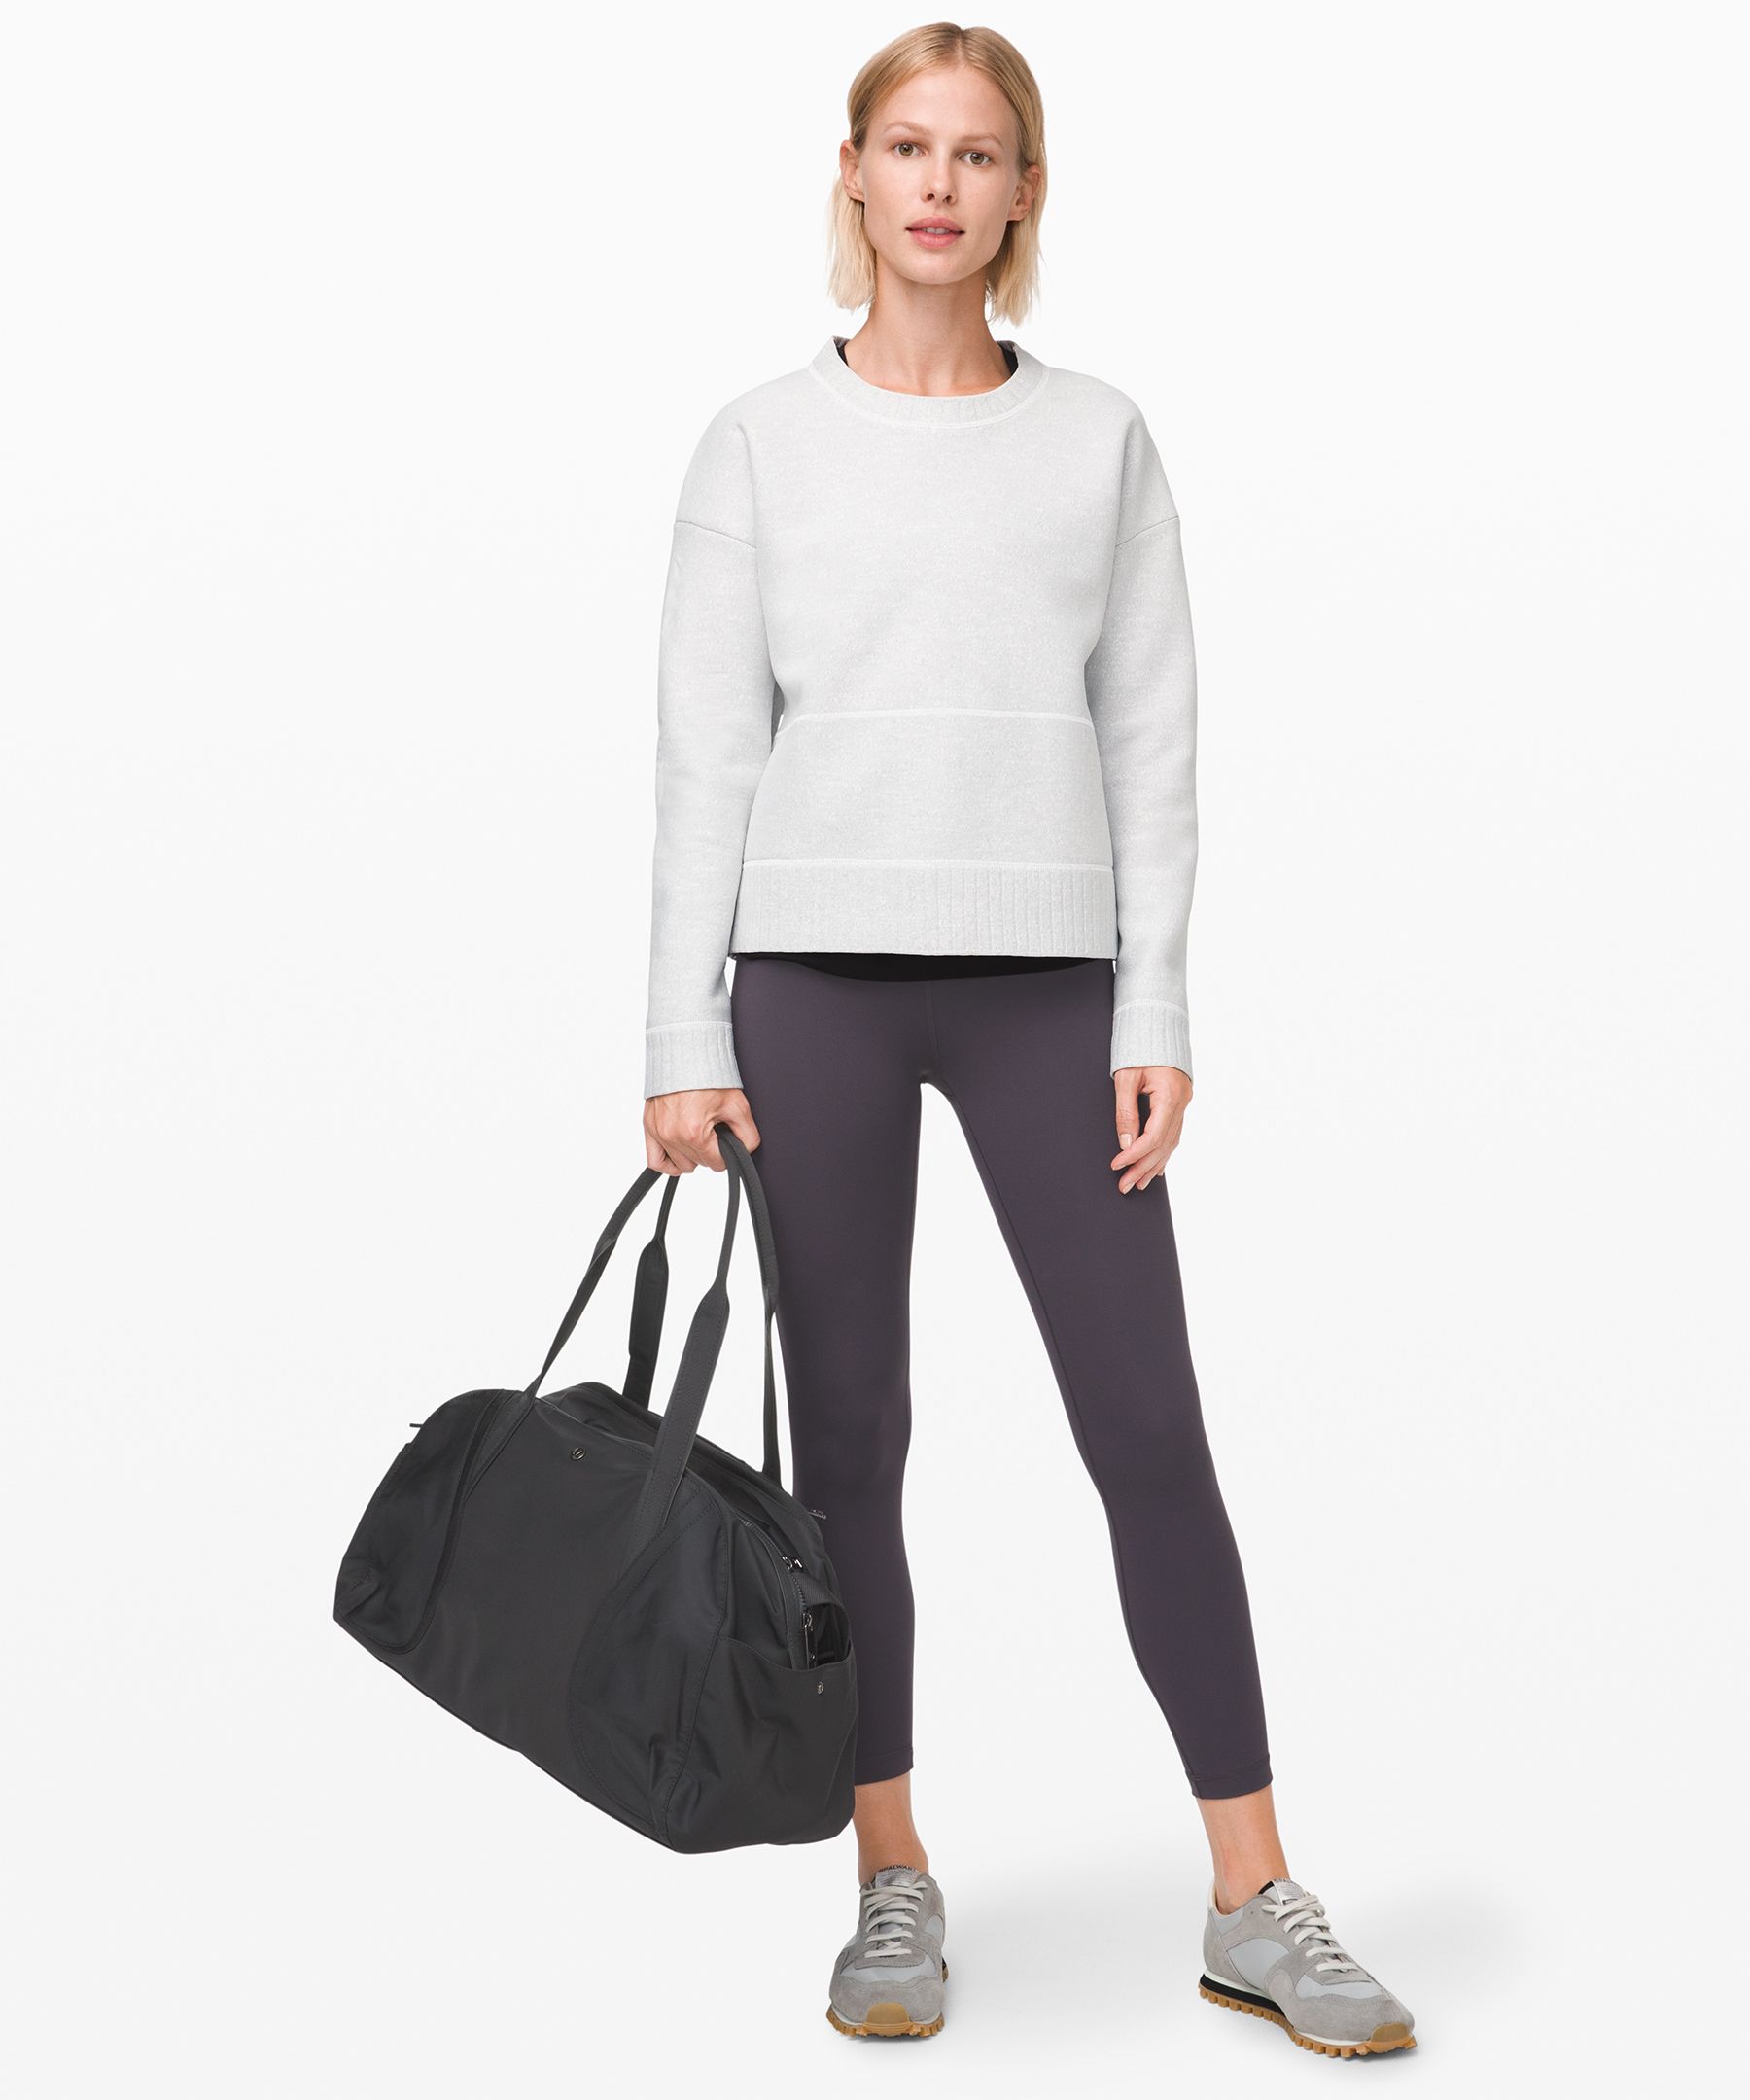 lululemon out of range tote review